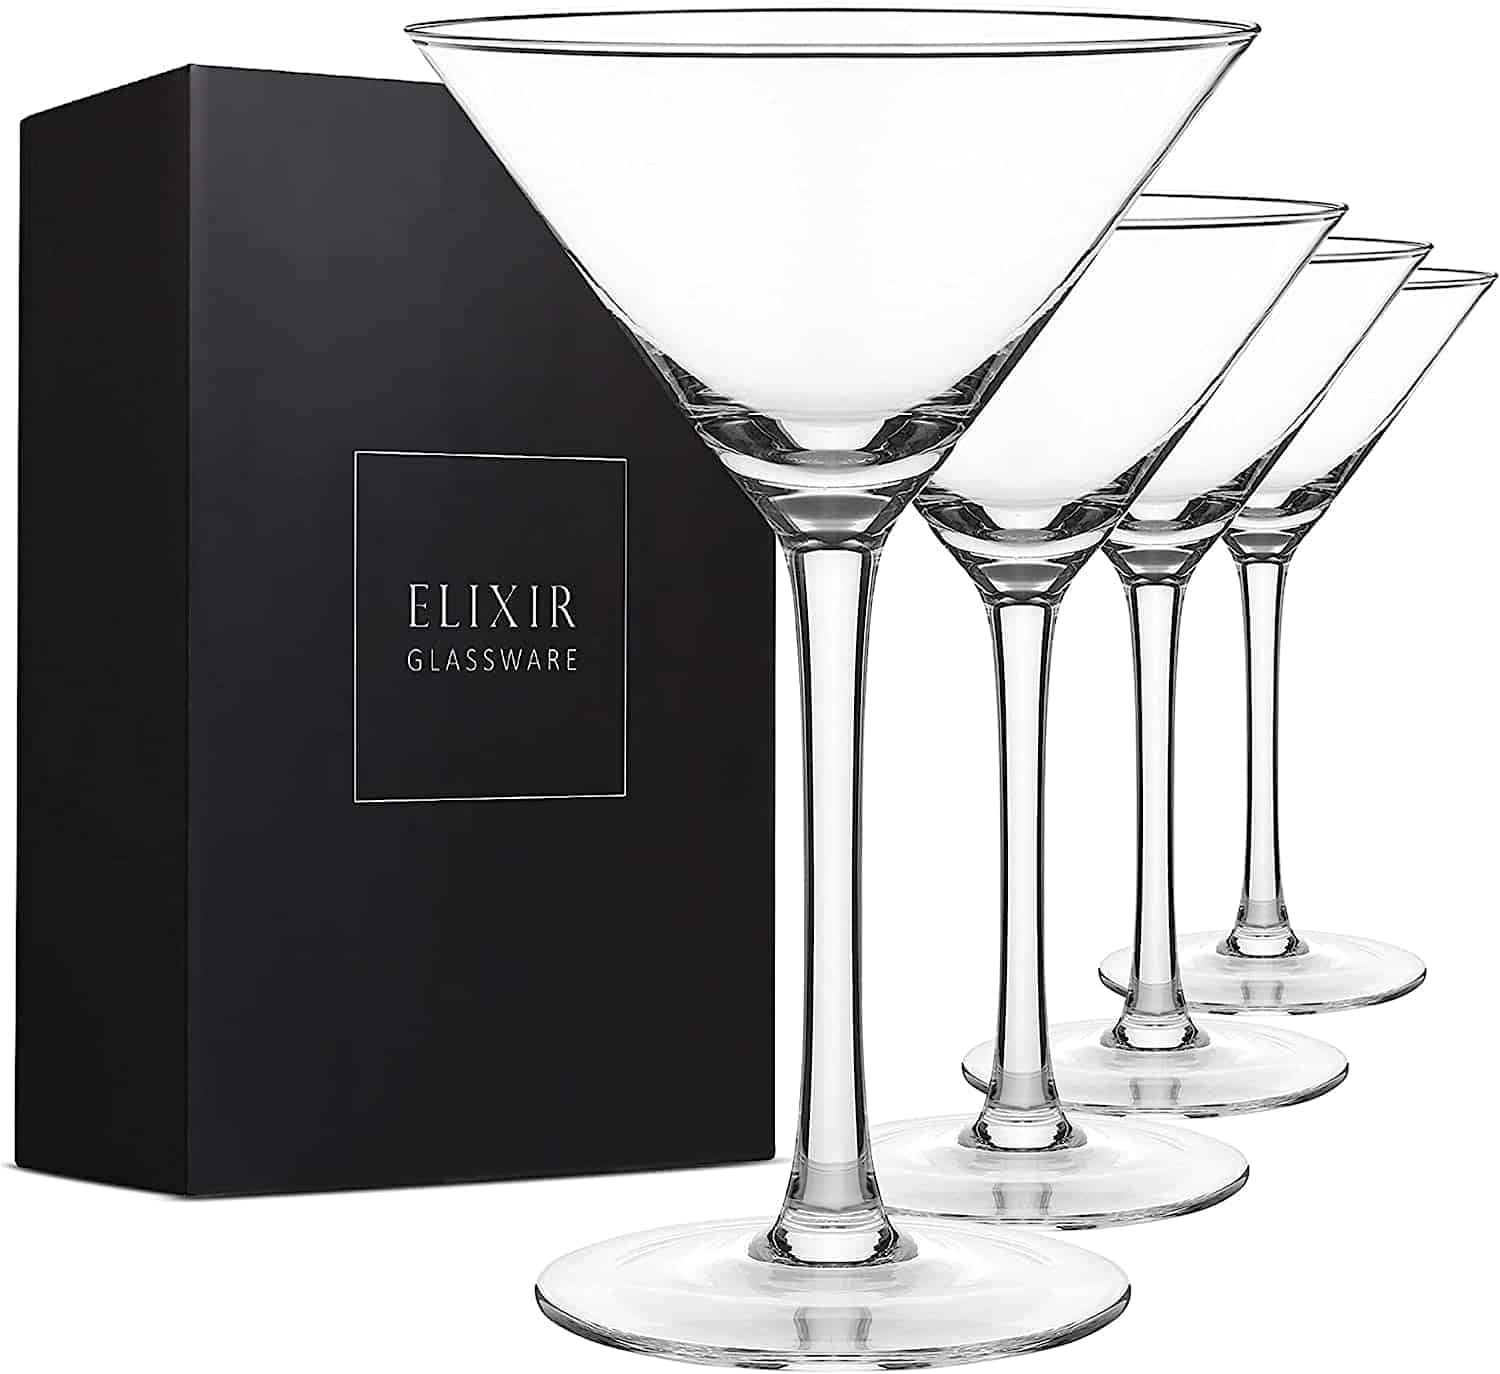 Martini Glasses Set of 4 - Hand Blown Crystal Martini Glasses with Stem